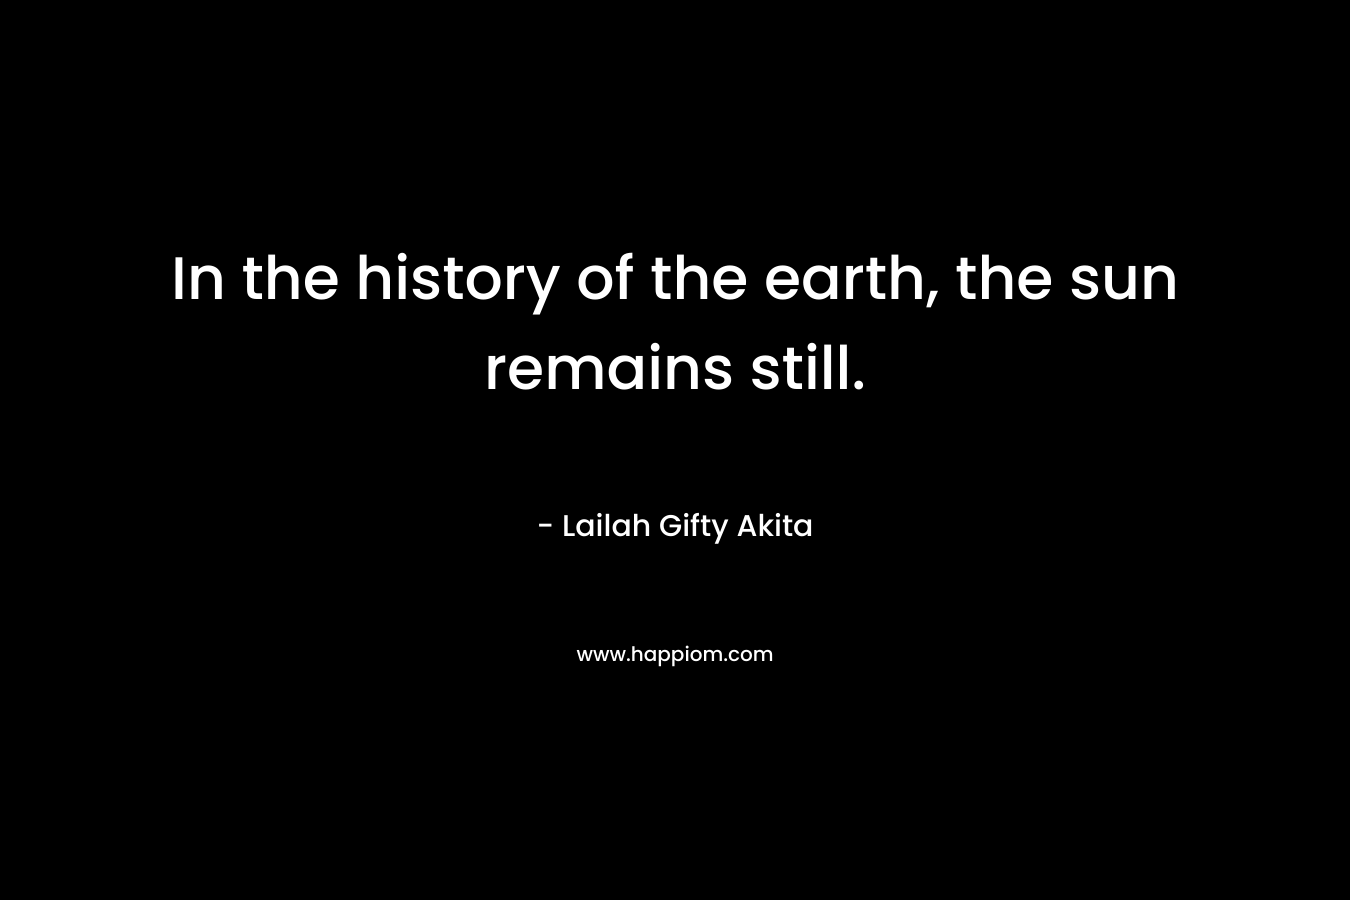 In the history of the earth, the sun remains still.